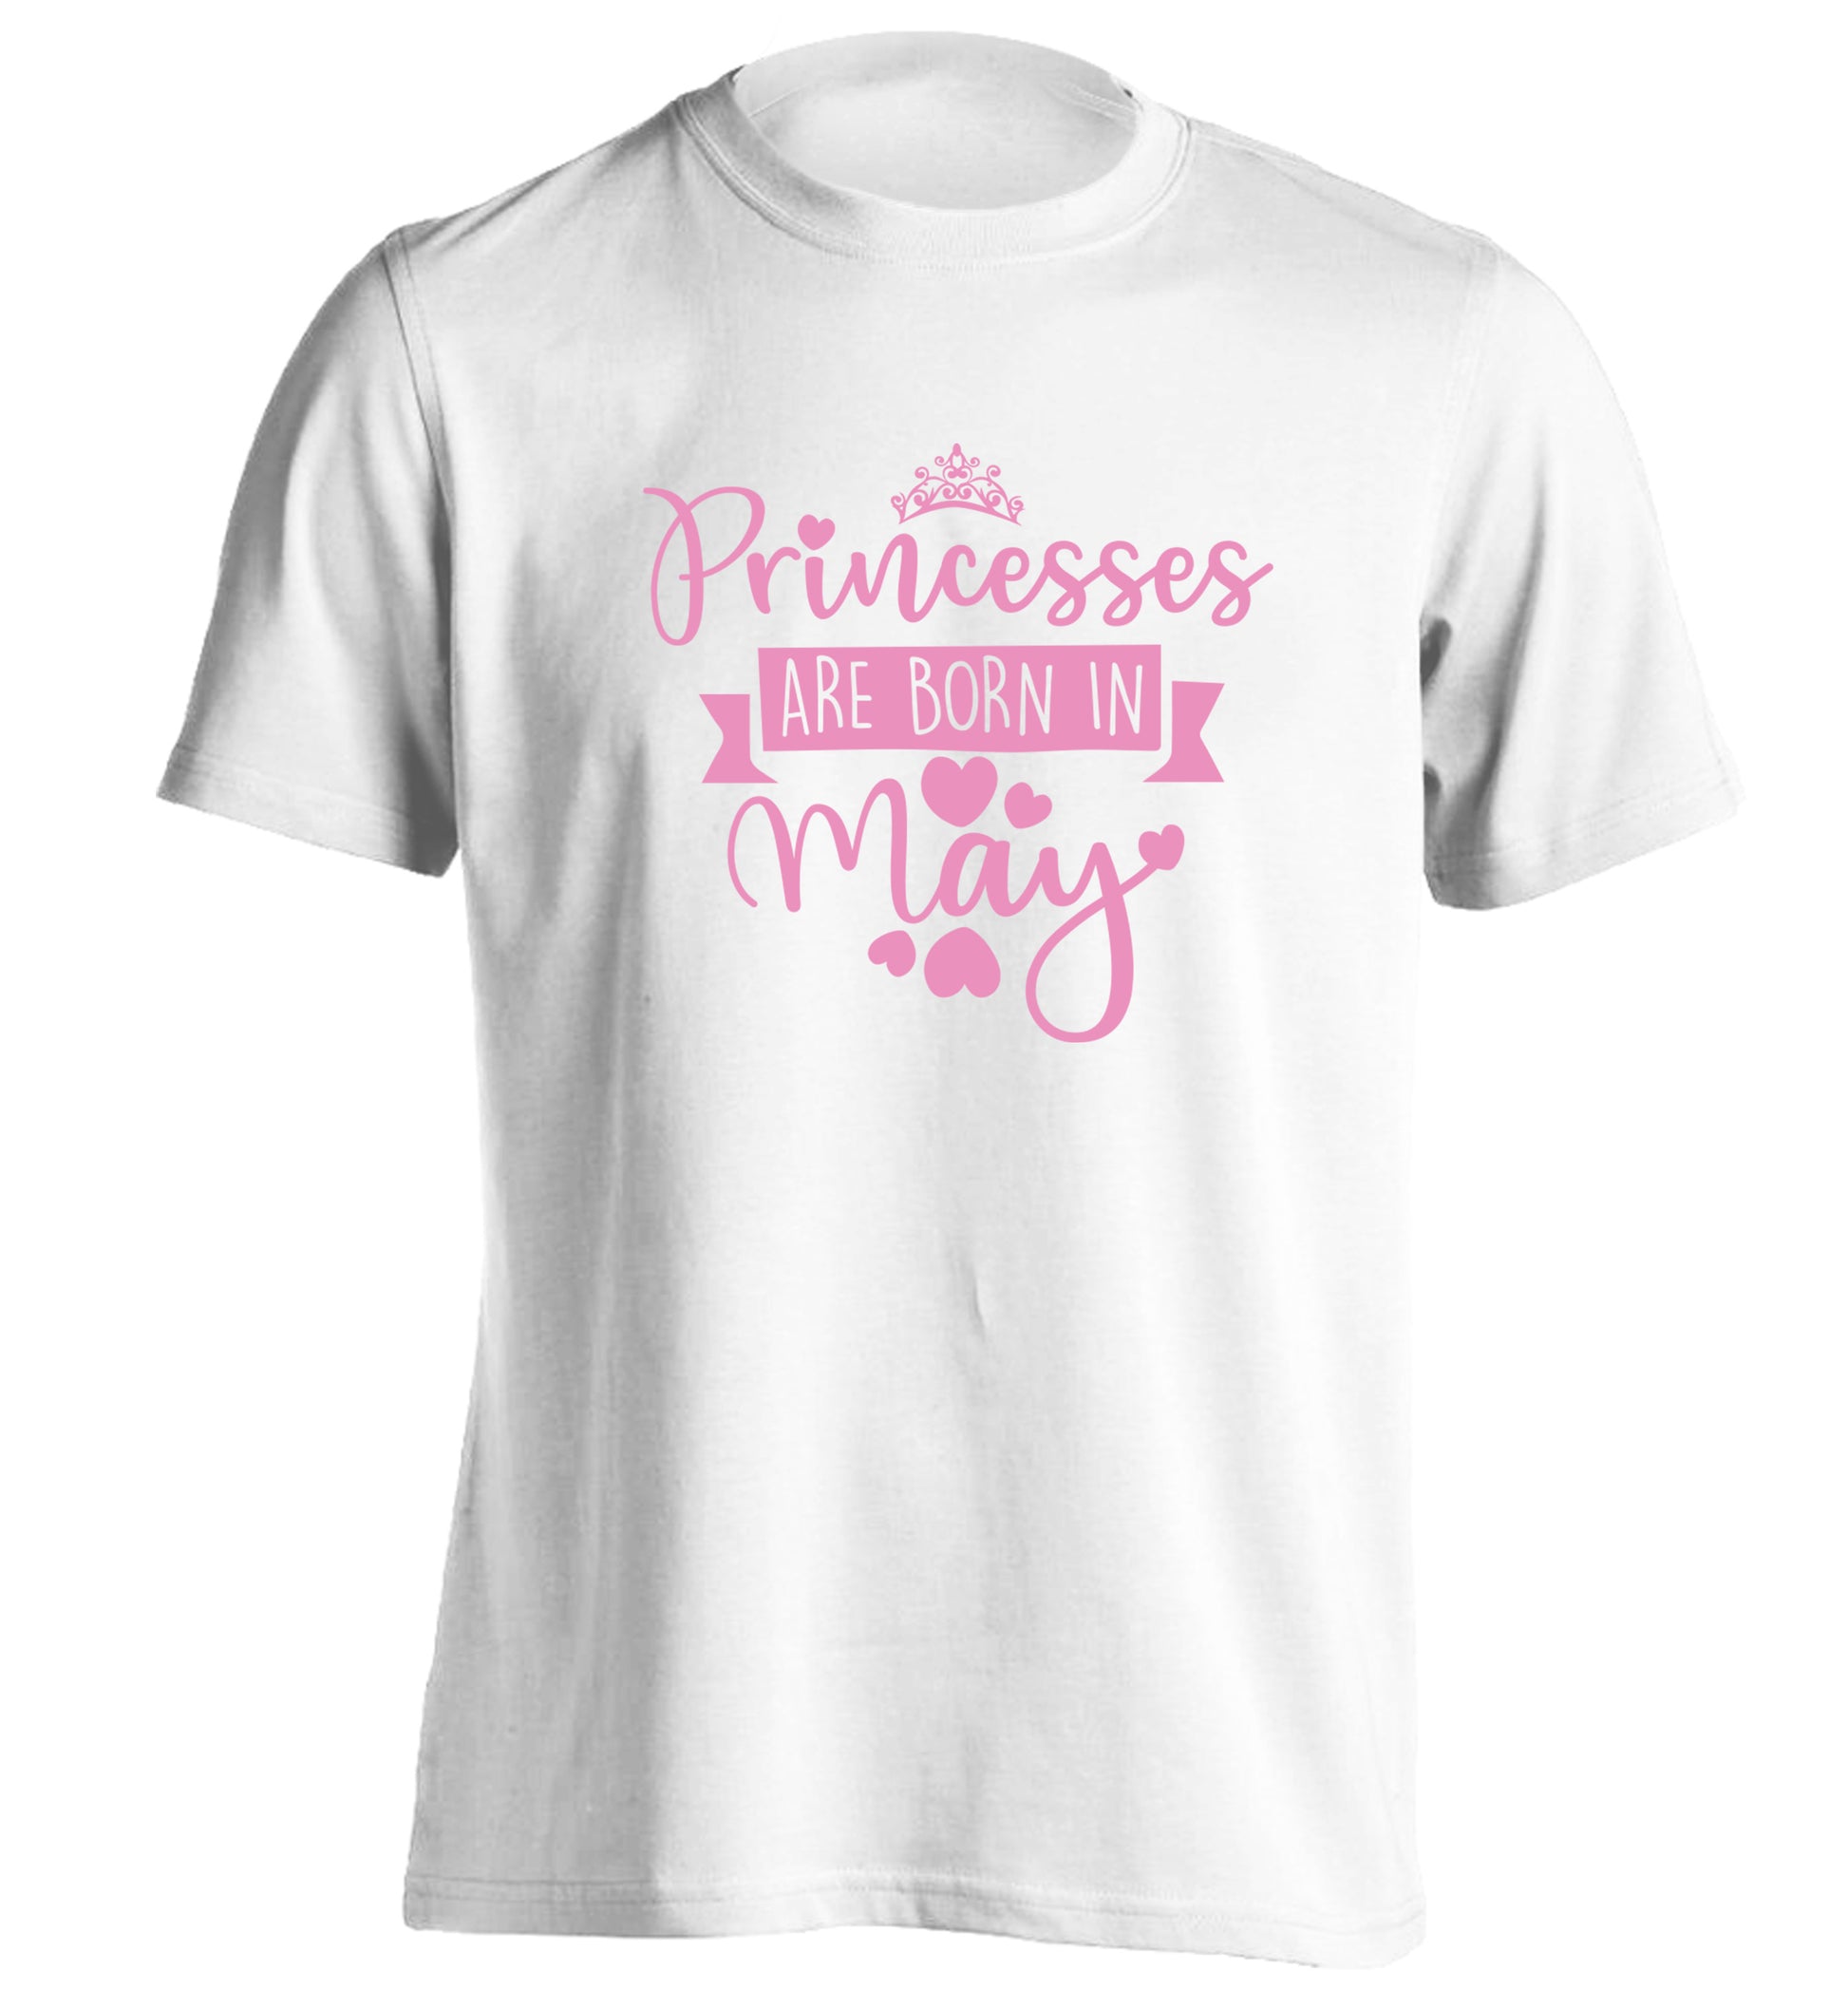 Princesses are born in May adults unisex white Tshirt 2XL